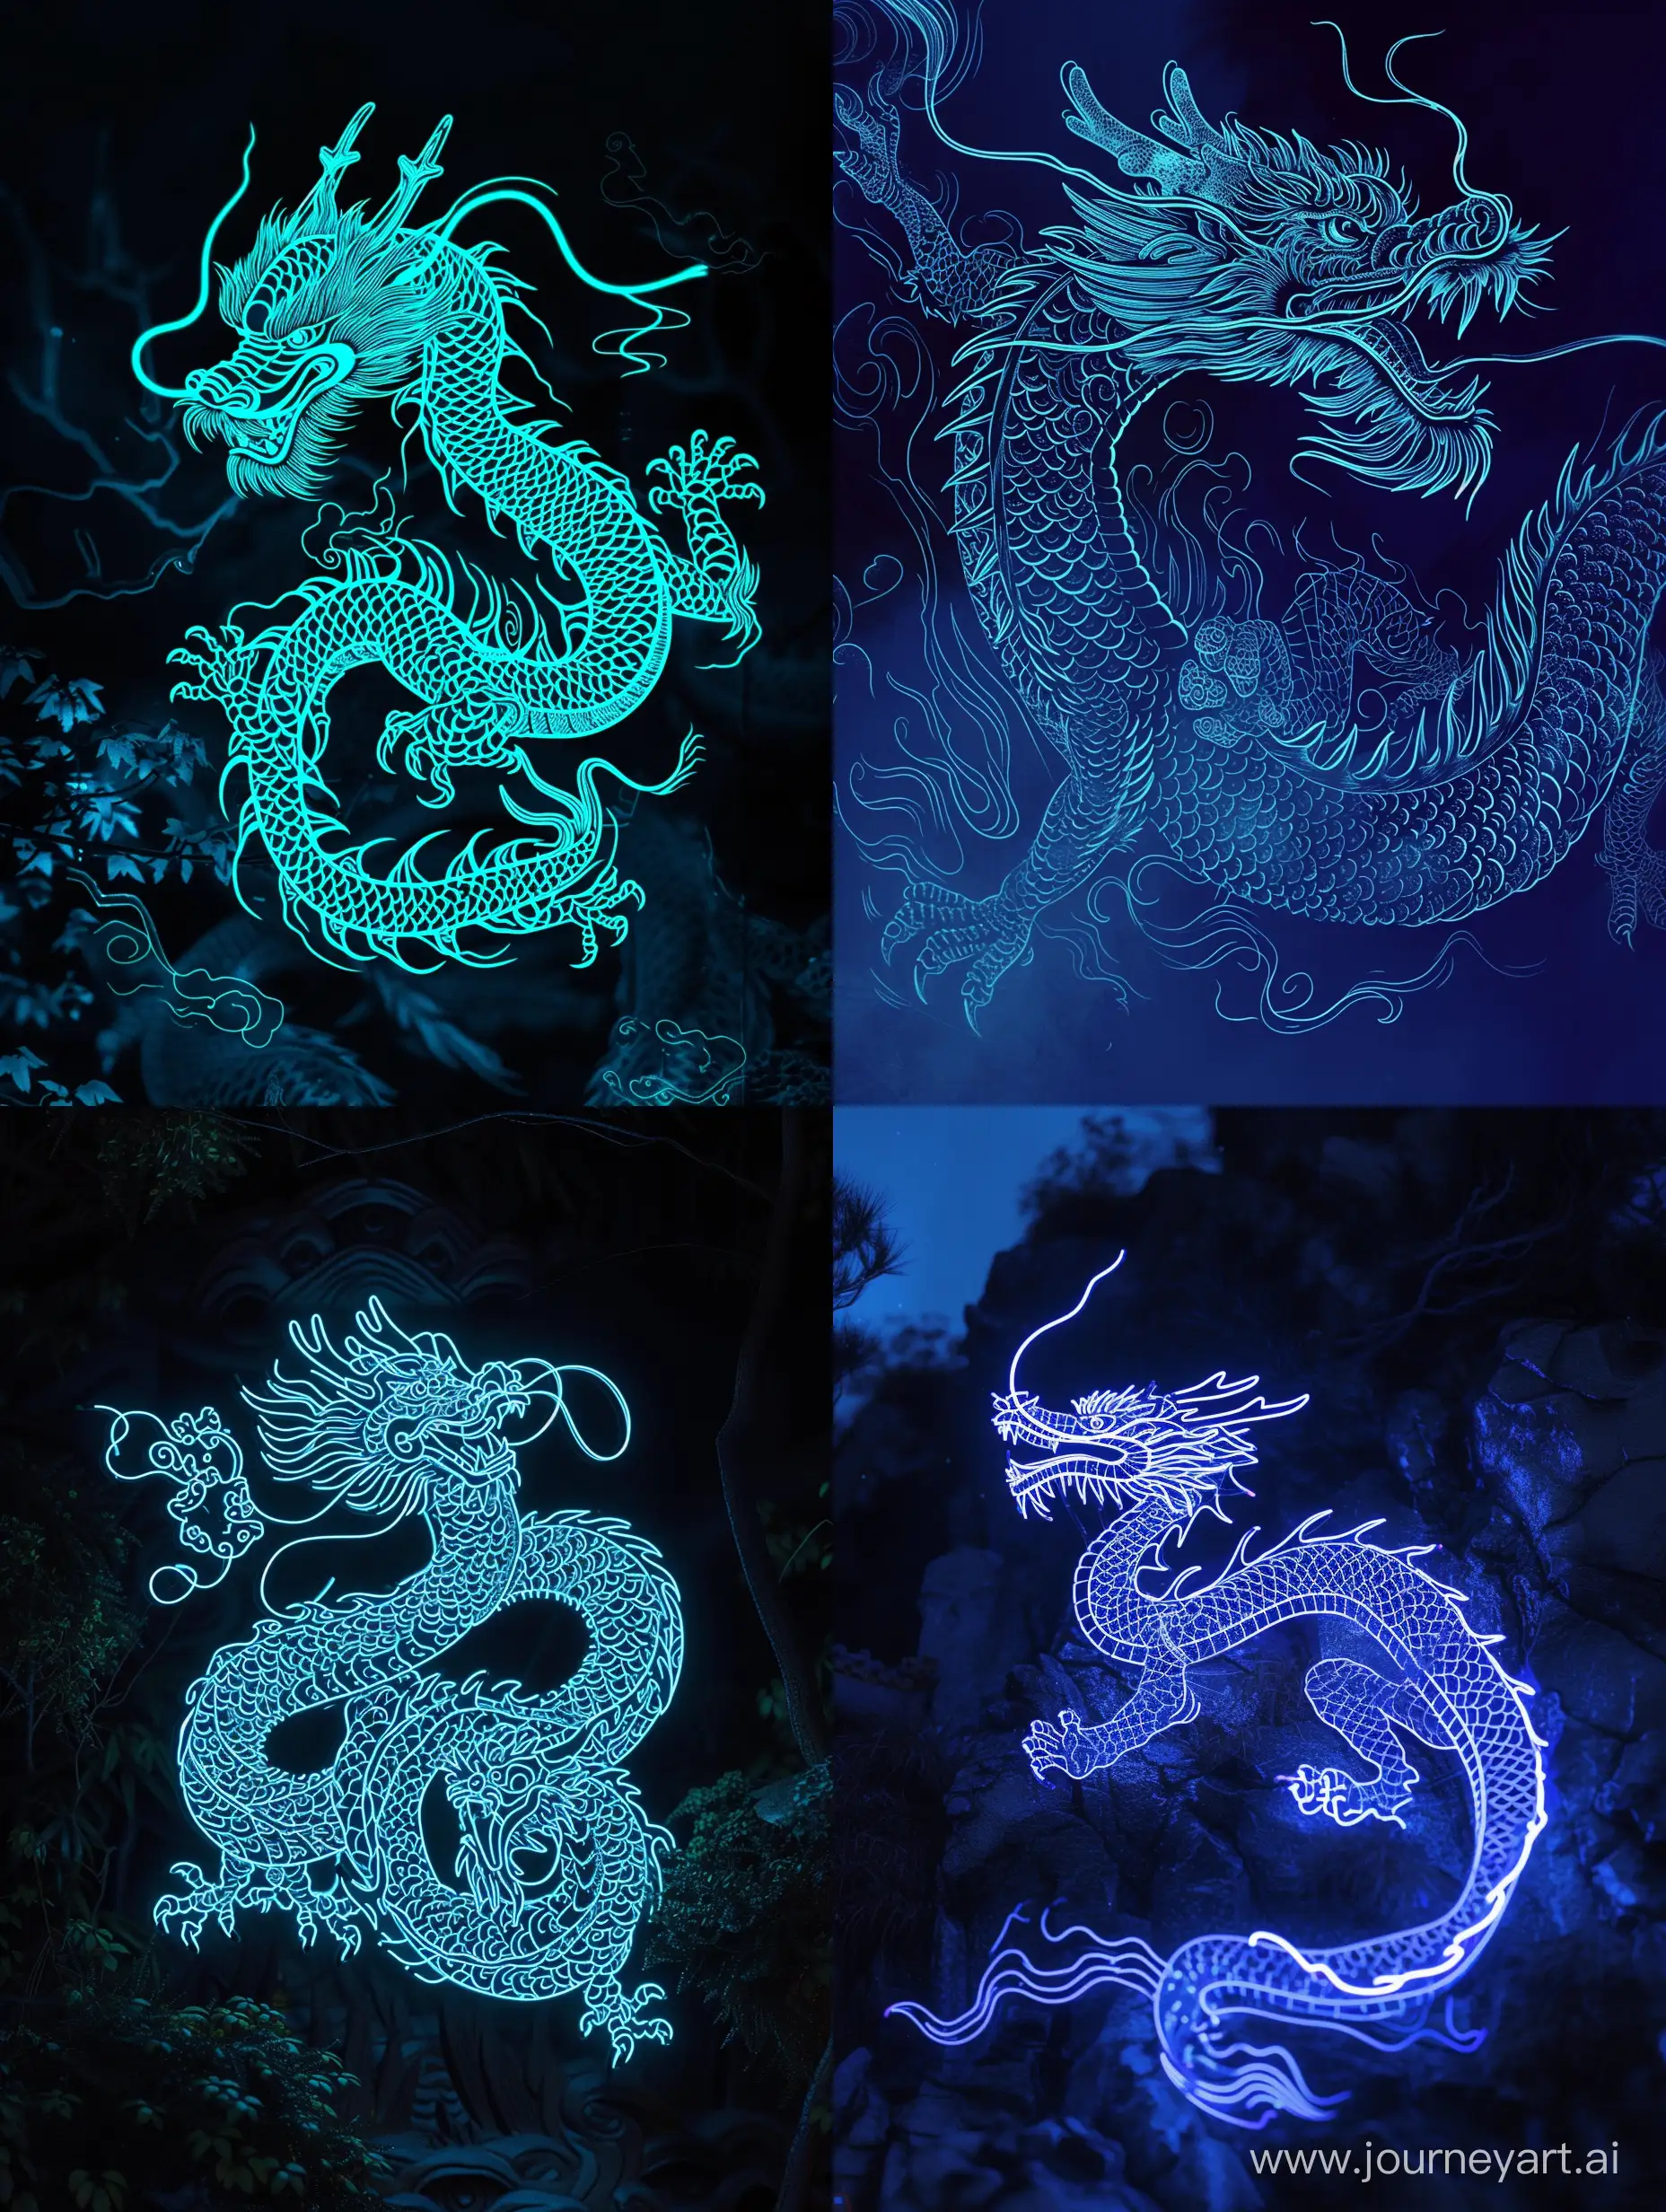 the cyan neon image is drawn on a Chinese dragon in the dark, in the style of kawacy, luxurious geometry, qian xuan, photobashing, group f/64, sharp linework, ary scheffer